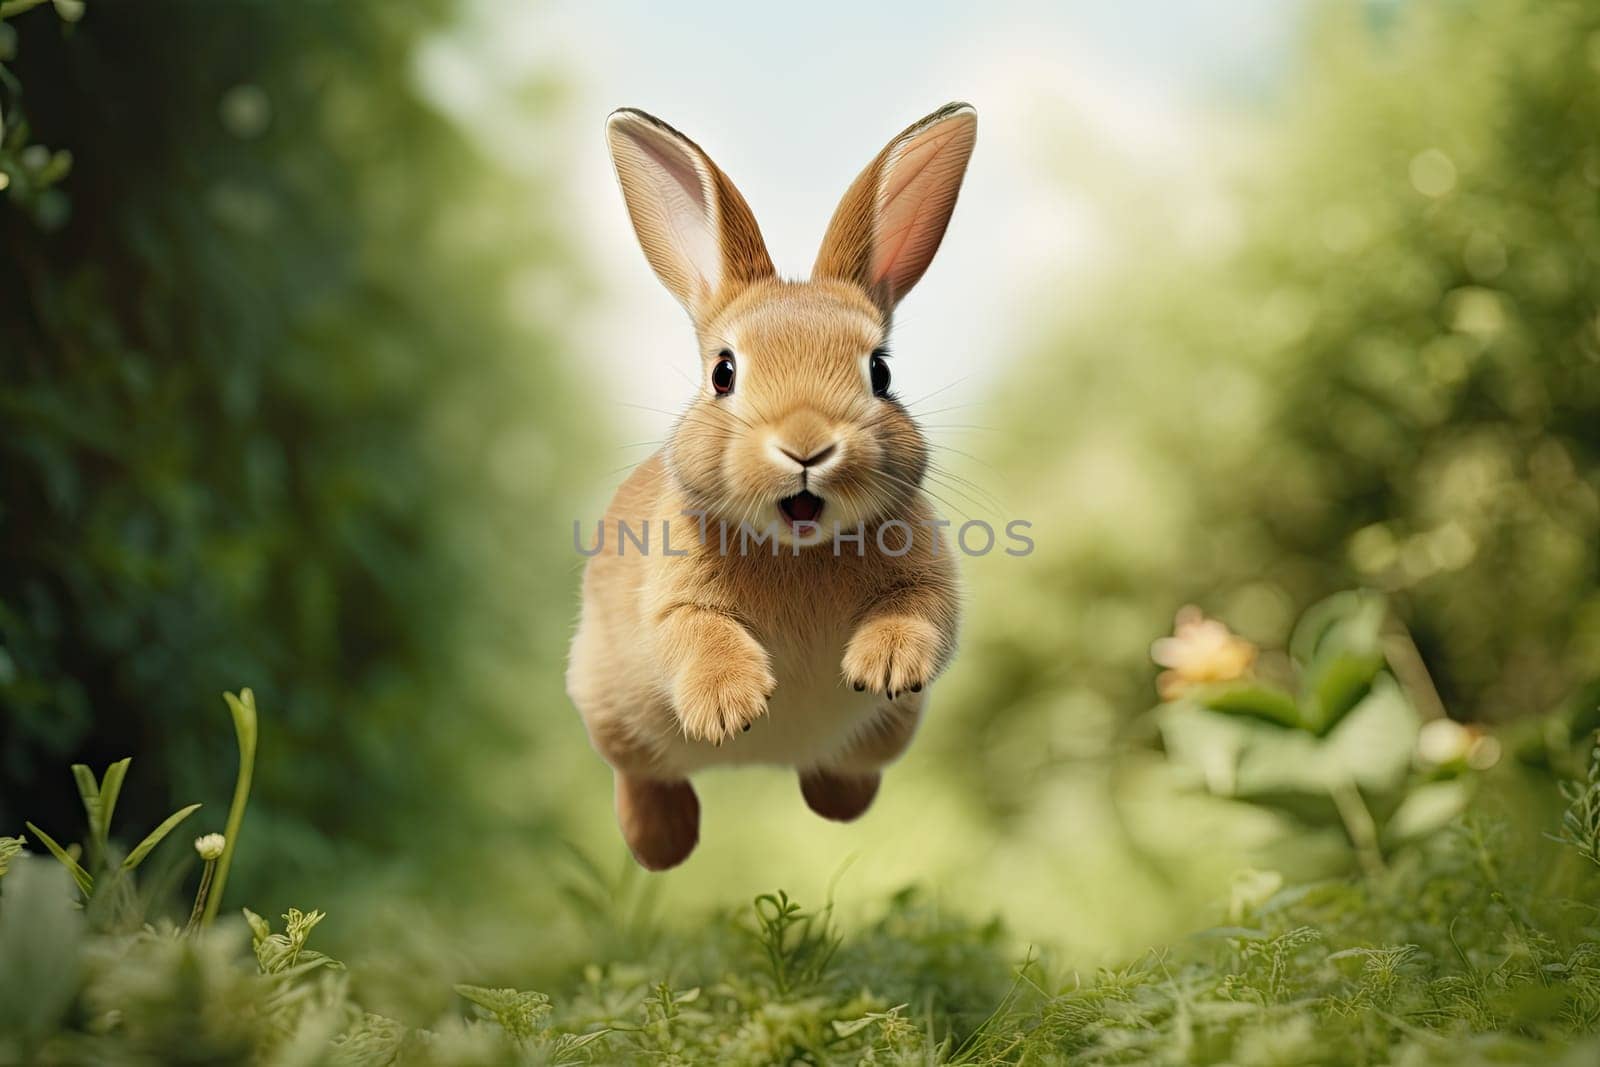 A Playful Rabbit Leaping High in the Air